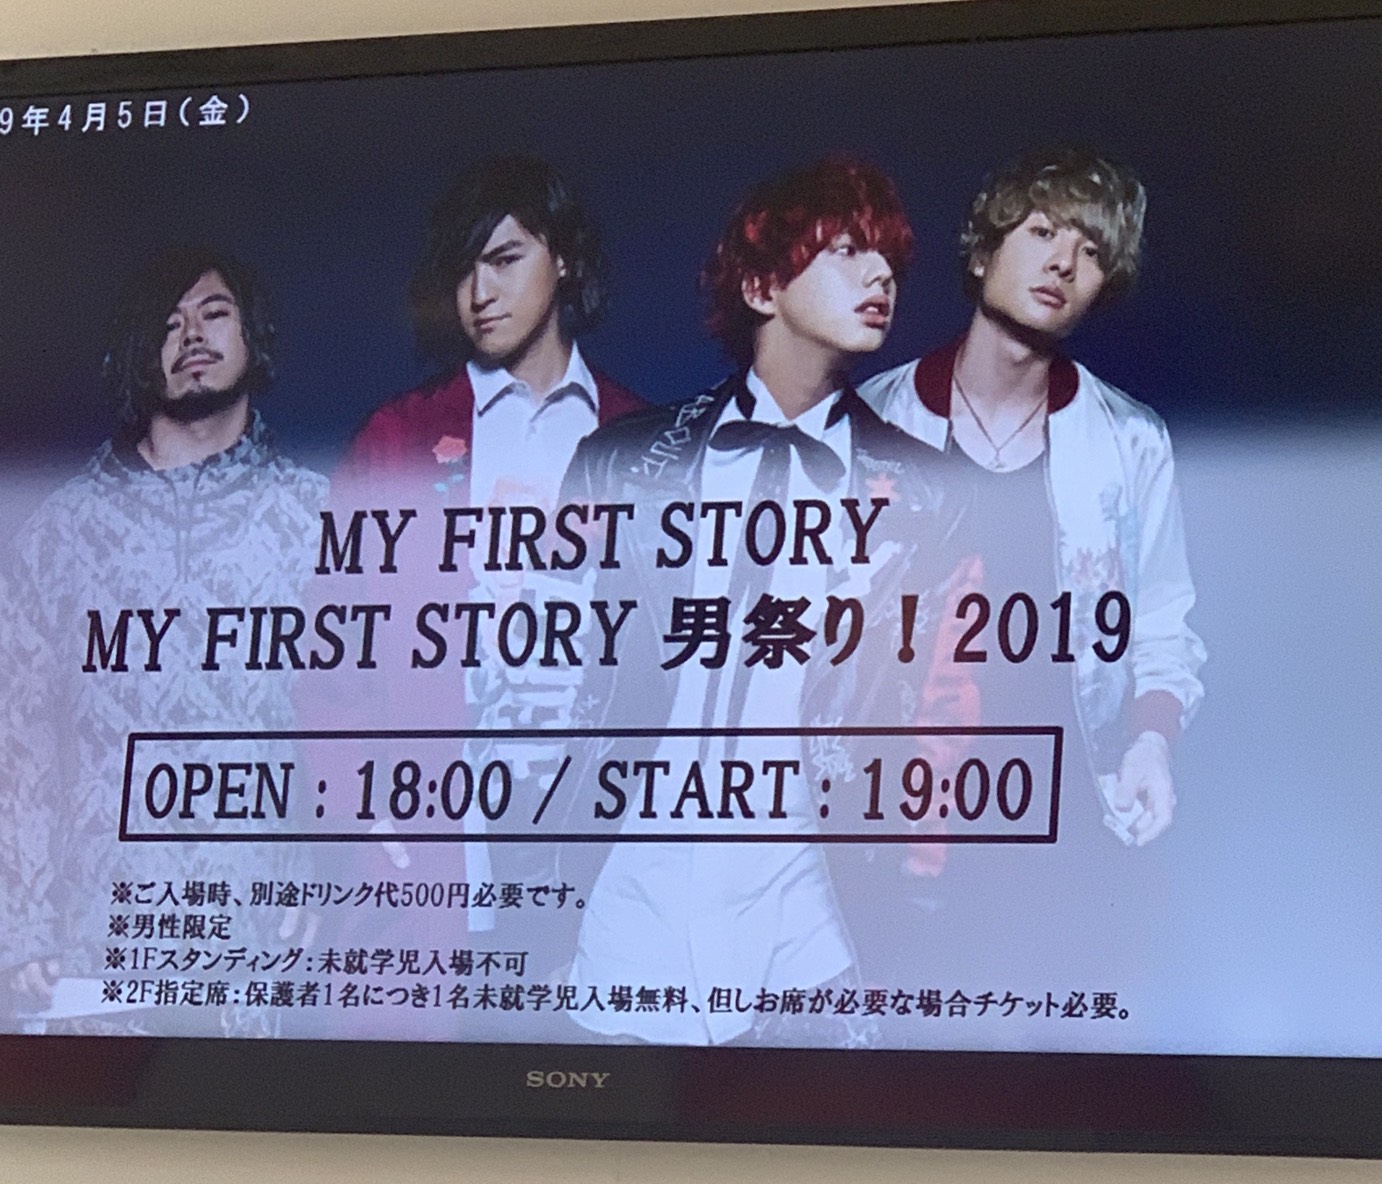 Y FIRST STORY 男祭り 2019 感想